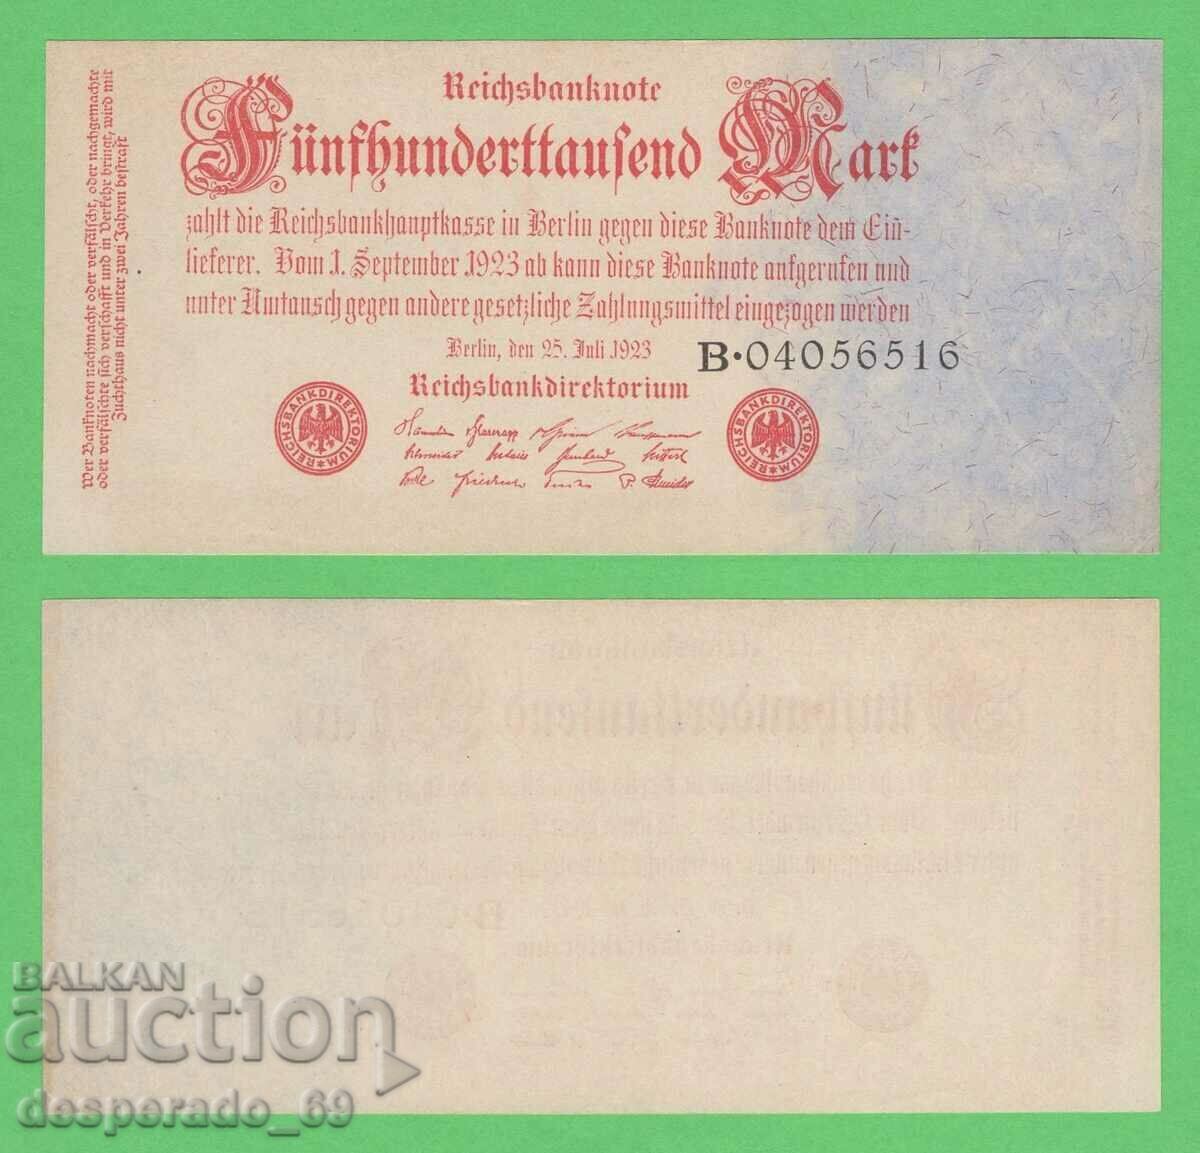 (¯`'•.¸GERMANY 500,000 marks 25.07.1923 UNC-¸.•'´¯)